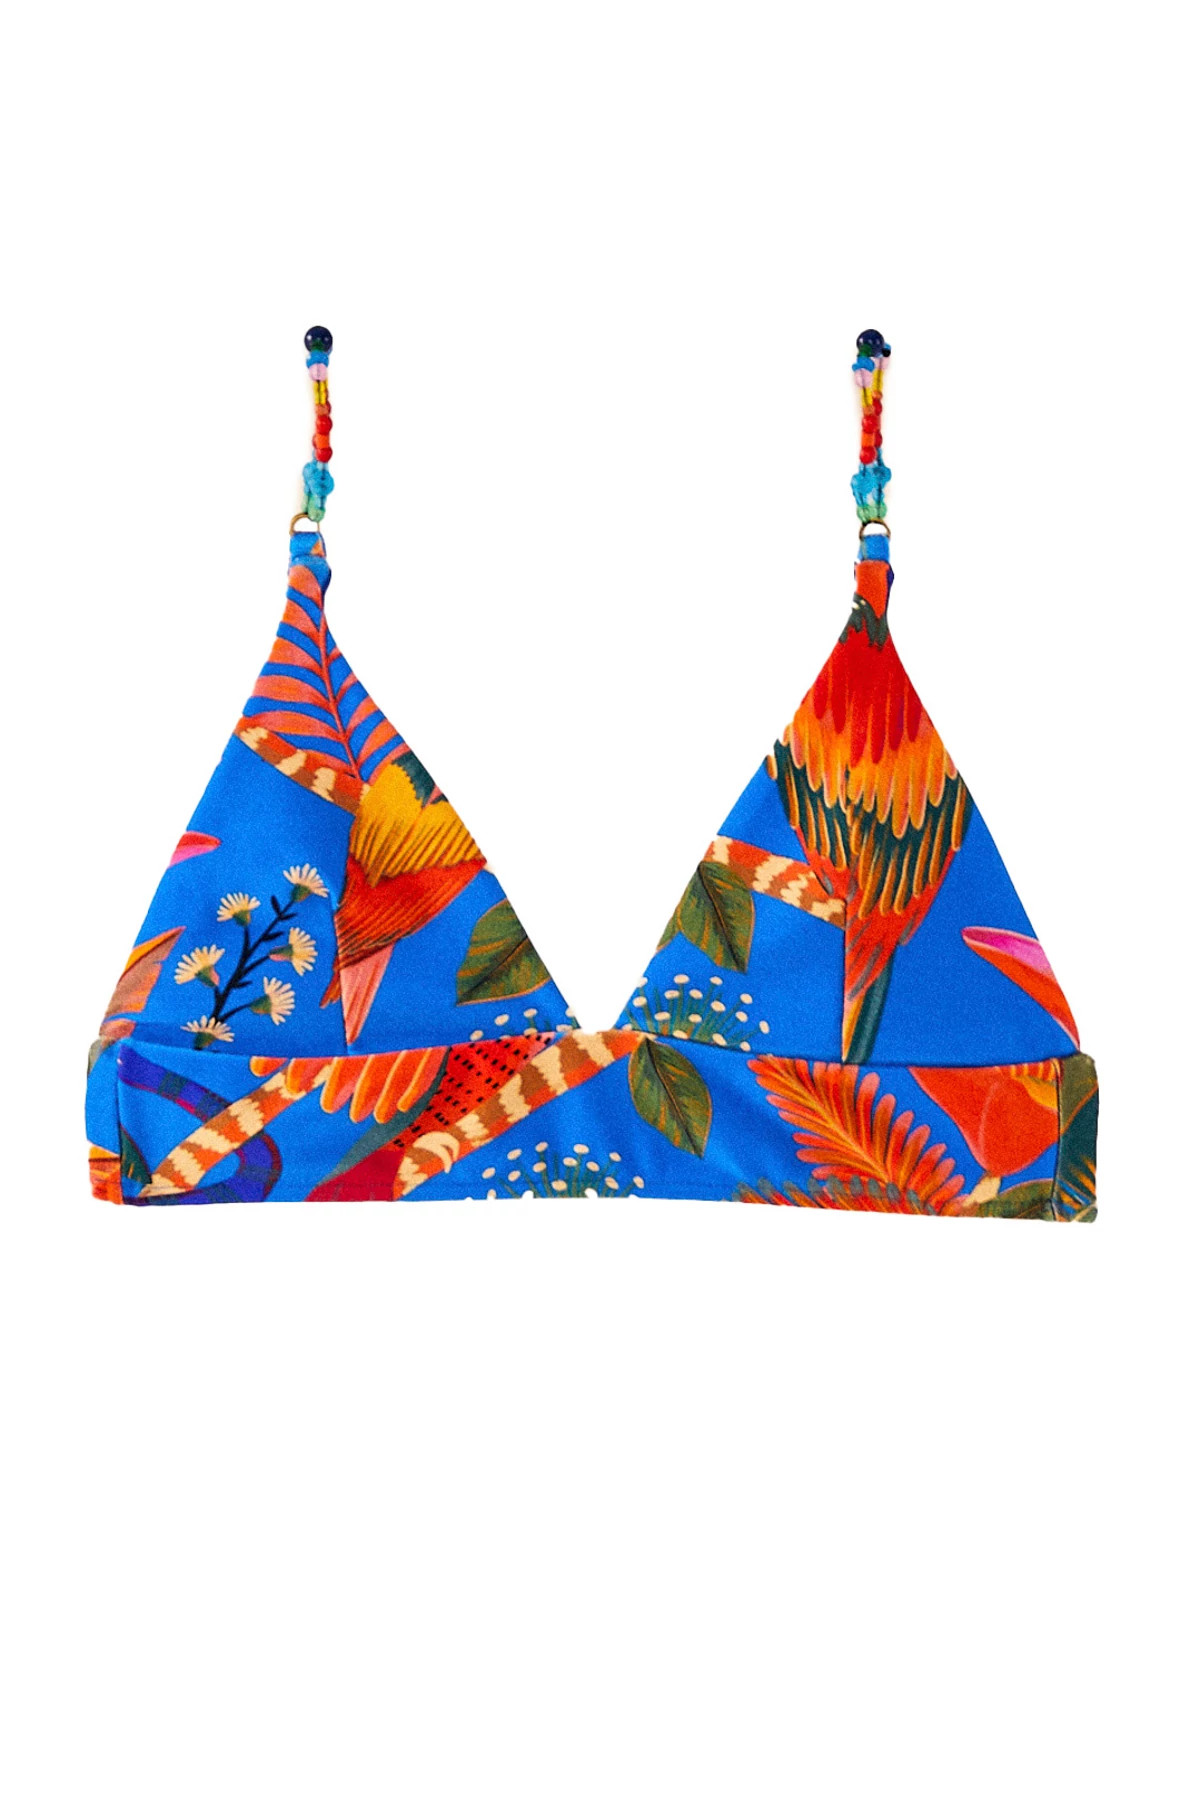 MACAW PARTY Macaw Party Banded Bikini Top image number 4